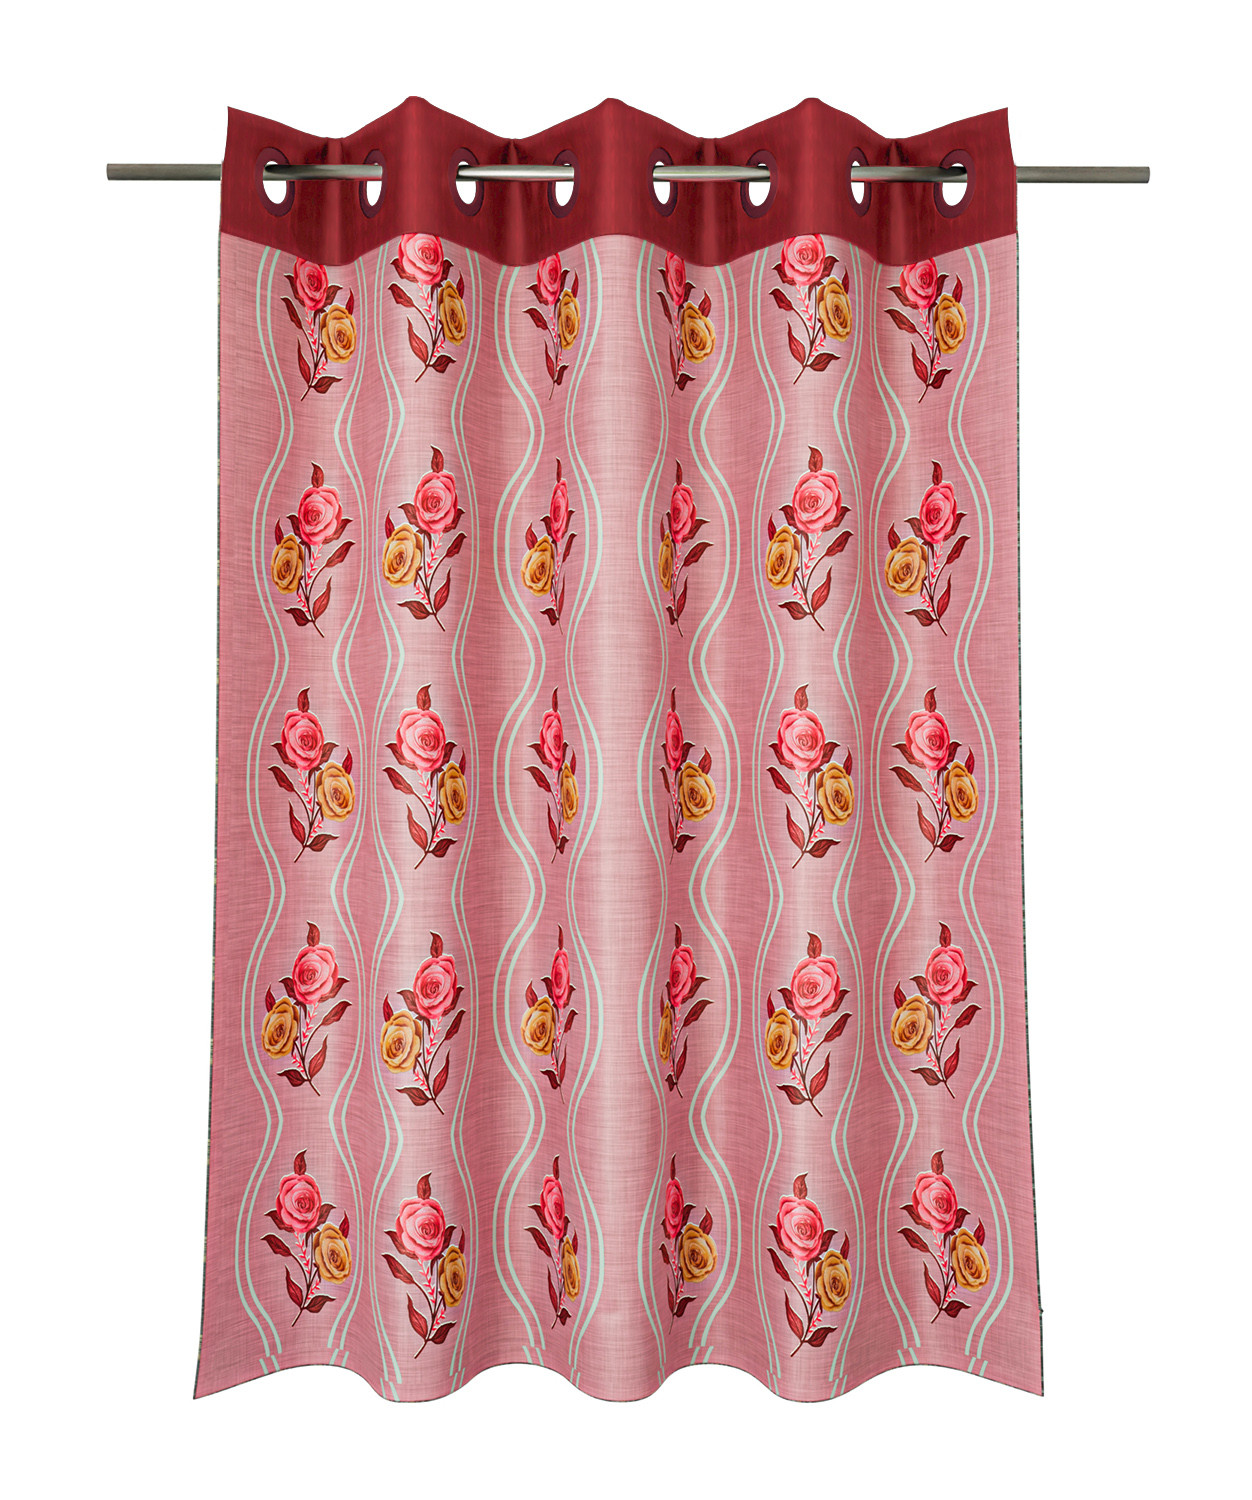 Kuber Industries Polyester Decorative 7 Feet Door Curtain | Rose Print Blackout Drapes Curtain With 8 Eyelet For Home & Office (Pink)